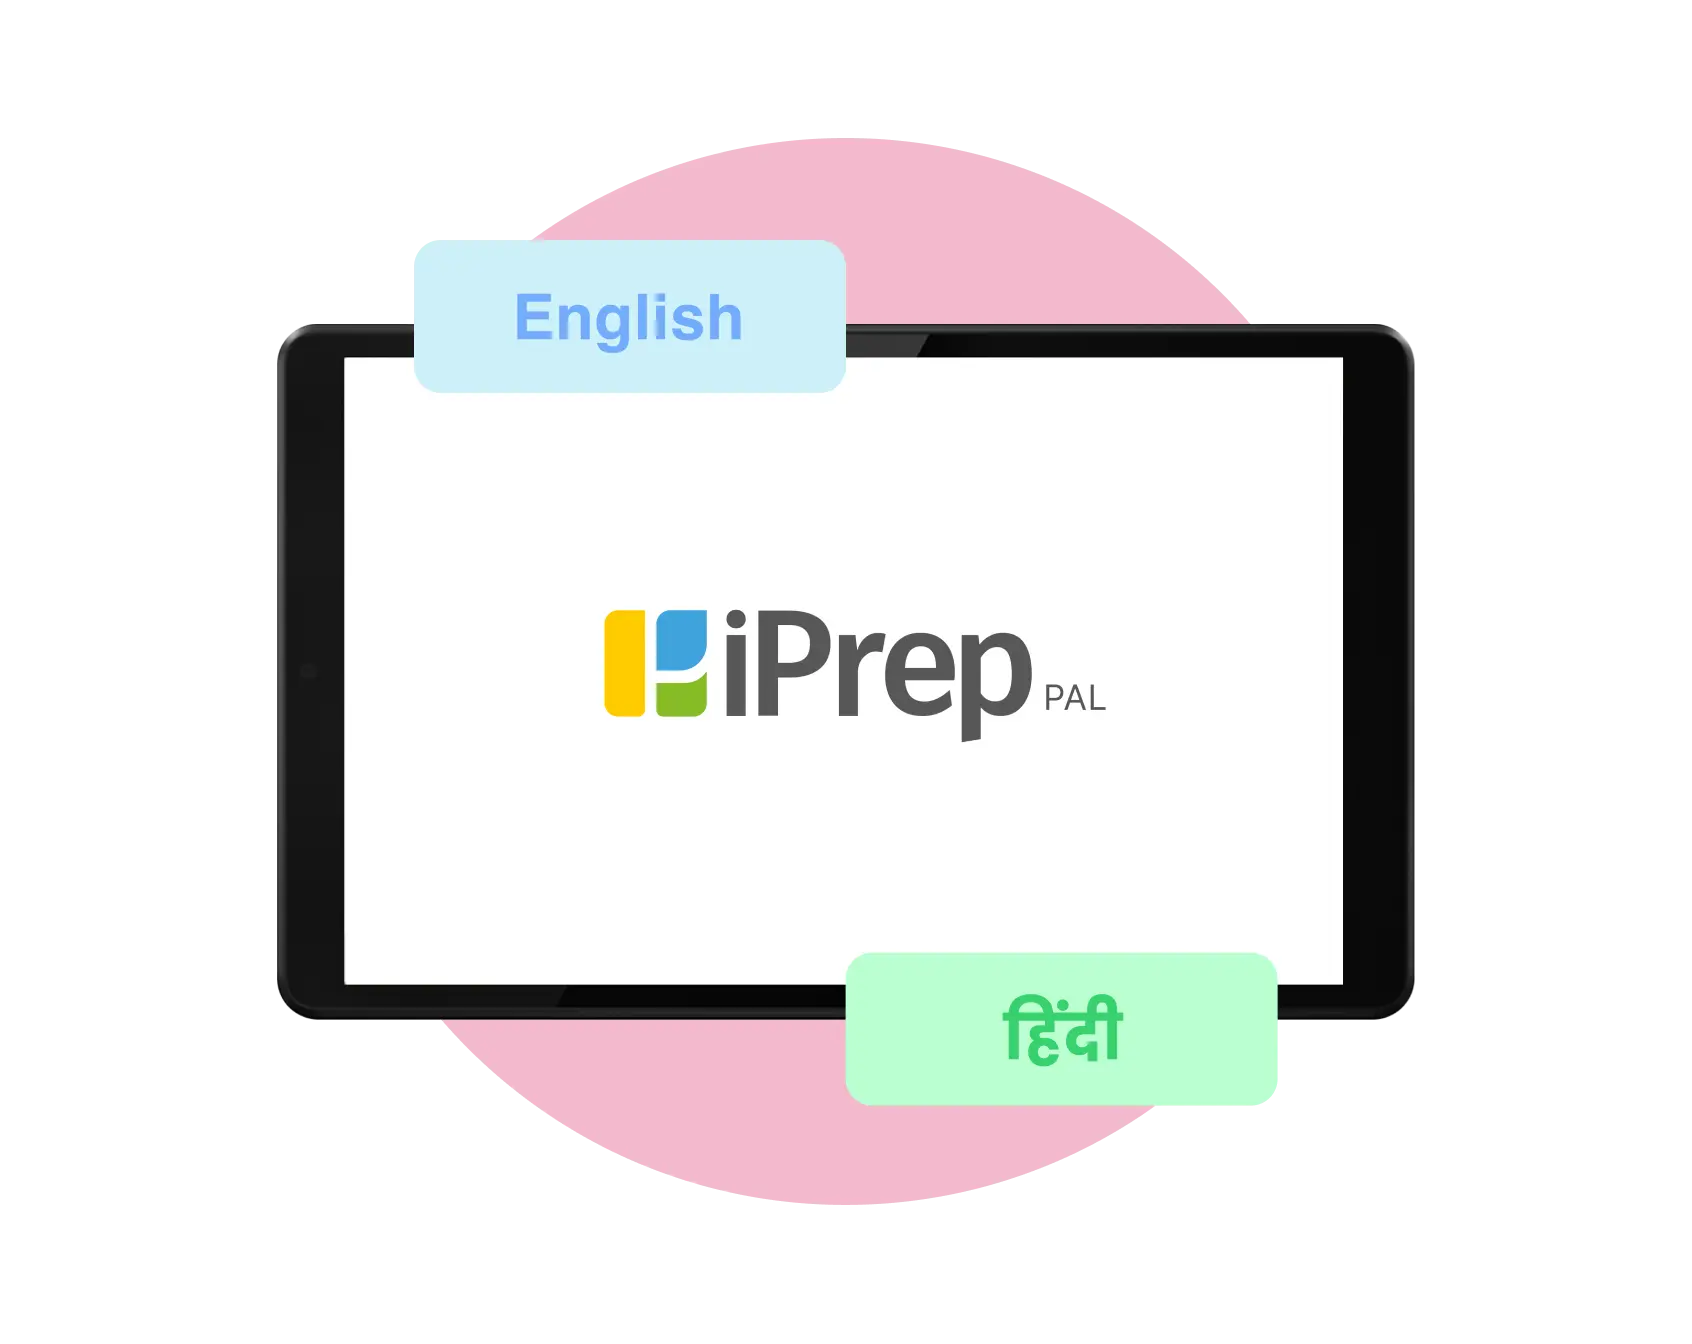 An image of Bilingual learning and growth content on iPrep PAL for Personalized Adaptive Learning, available in English and Hindi